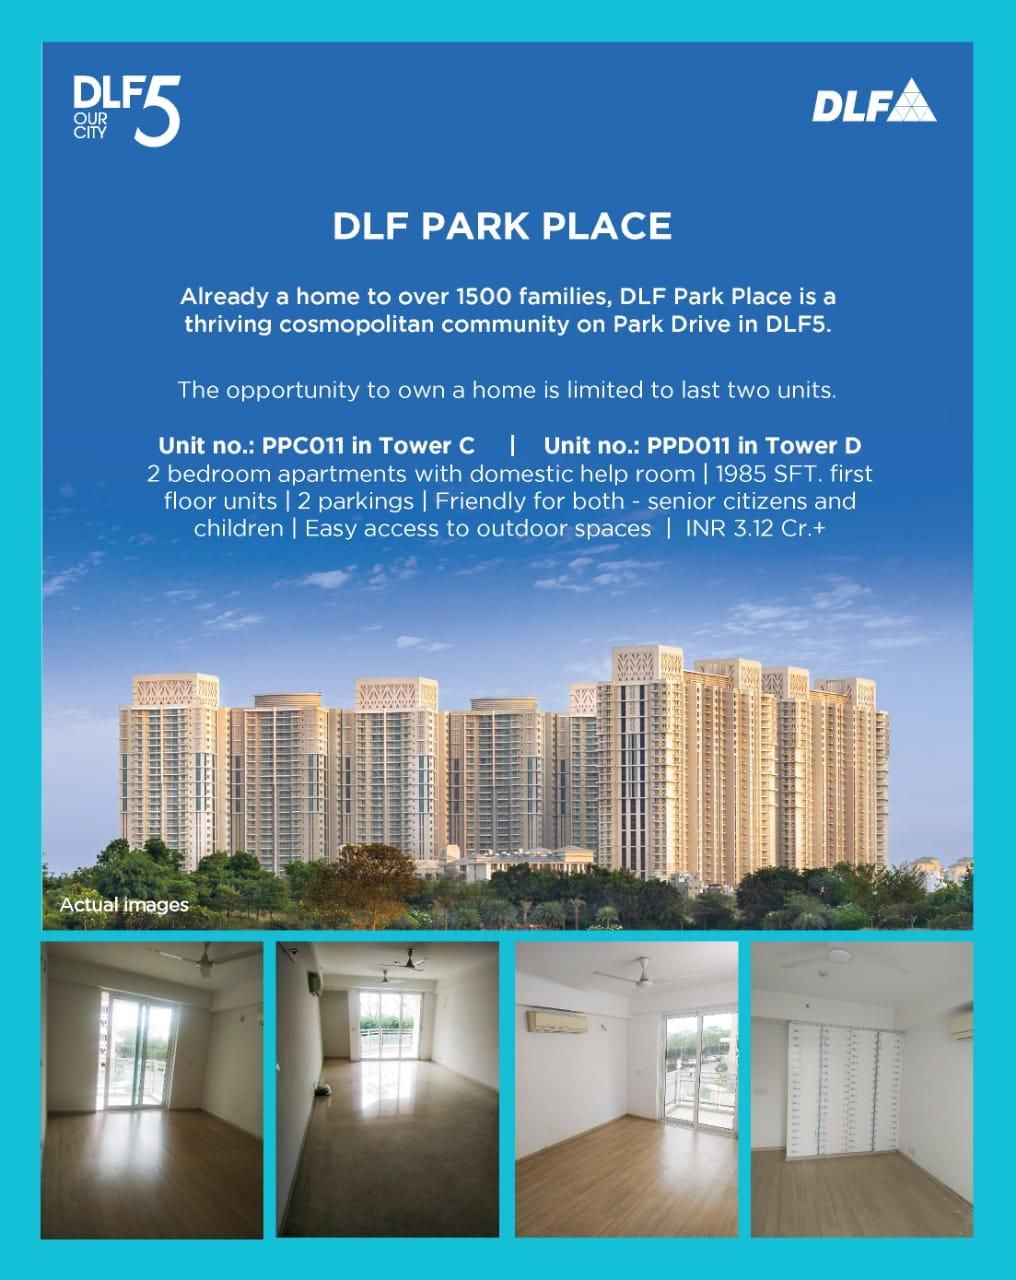 The opportunity to own a home is limited to last two units at DLF Park Place in Gurgaon Update